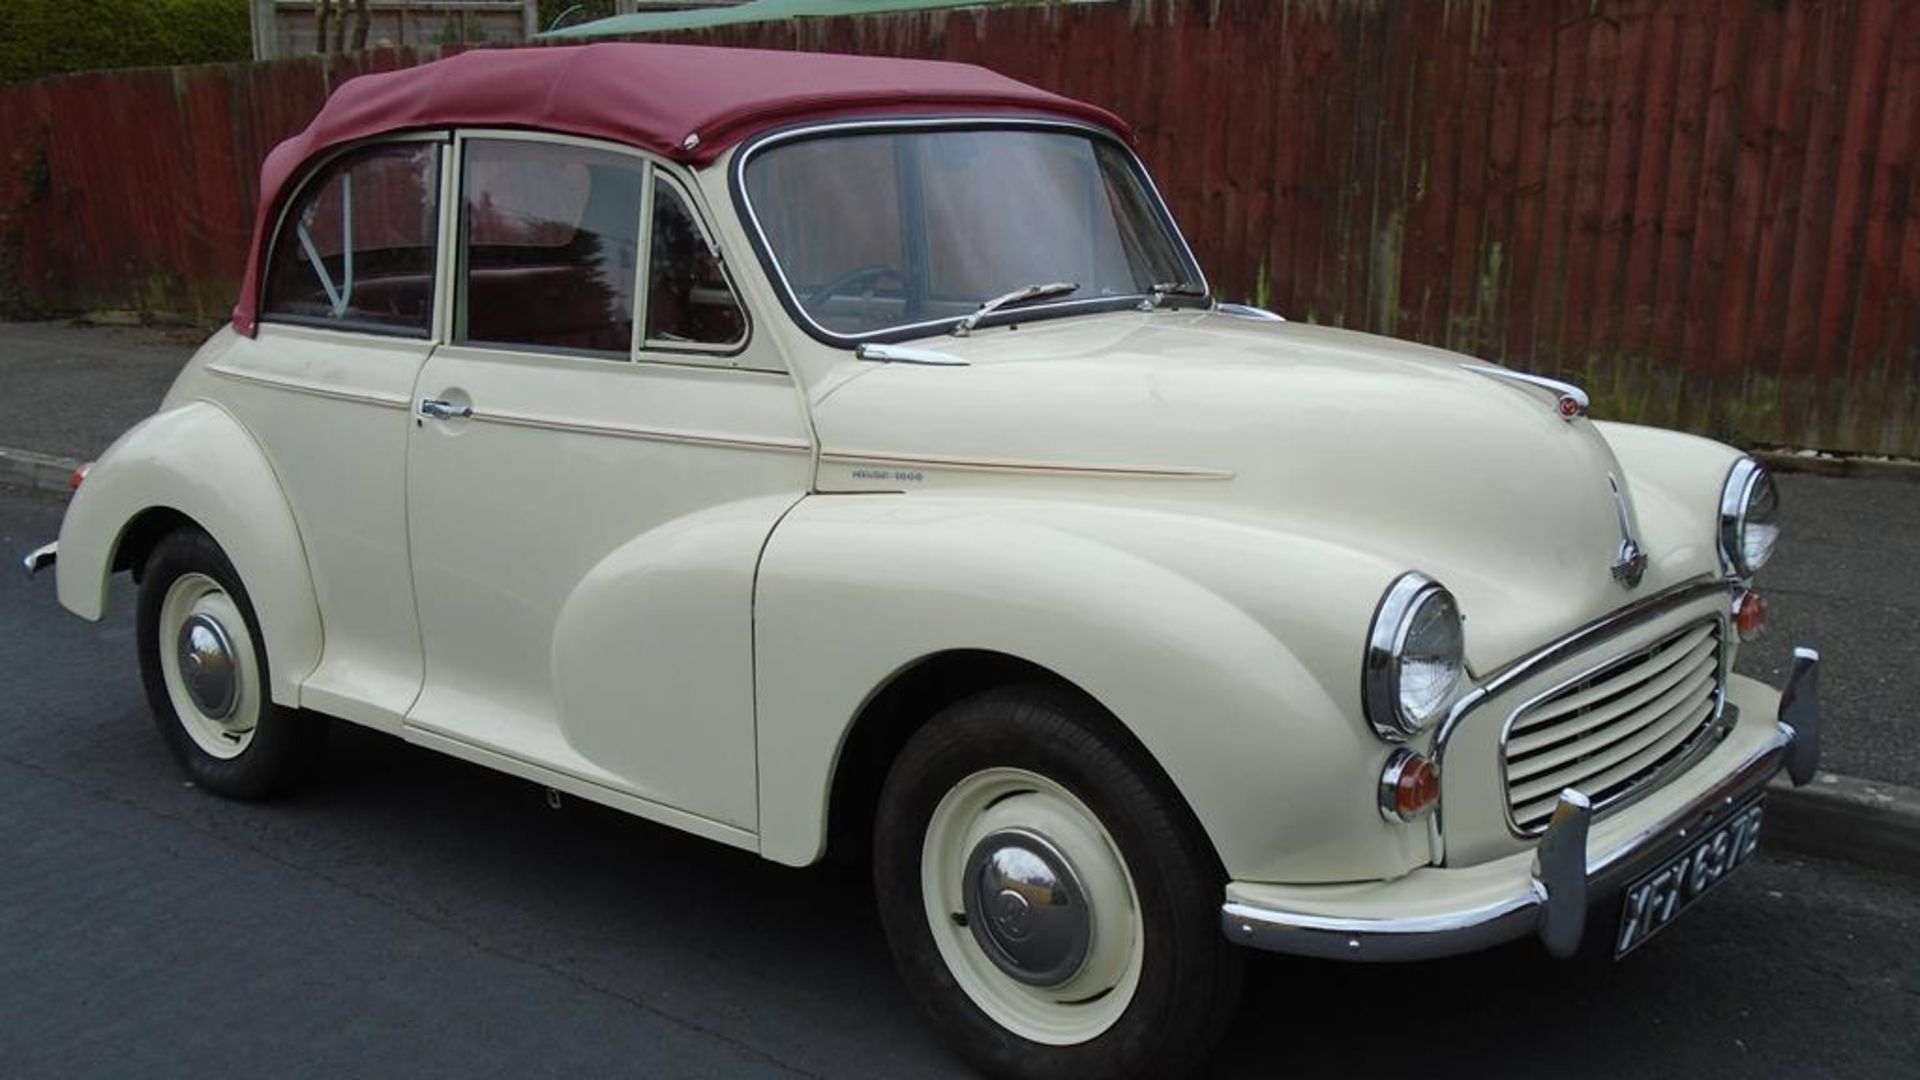 A 1964 Morris Minor replica convertible, registration number XFX 637B, Old English white. This